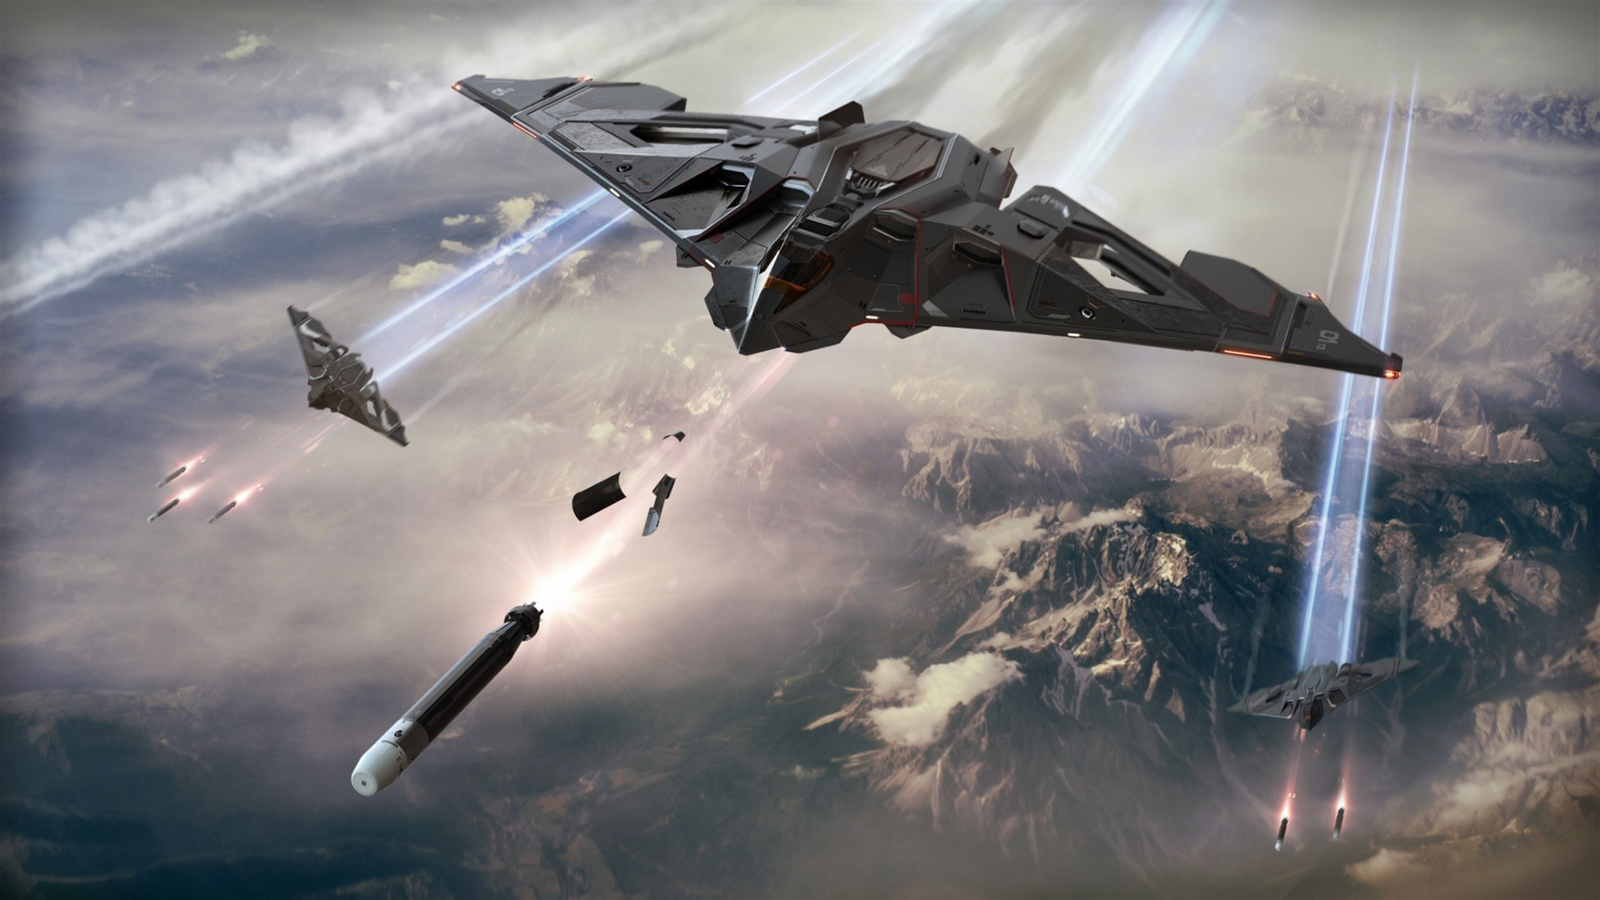 Star Citizen' Must Admit Its For-Sale Concept Ships Do Not Exist, Says  Advertising Authority